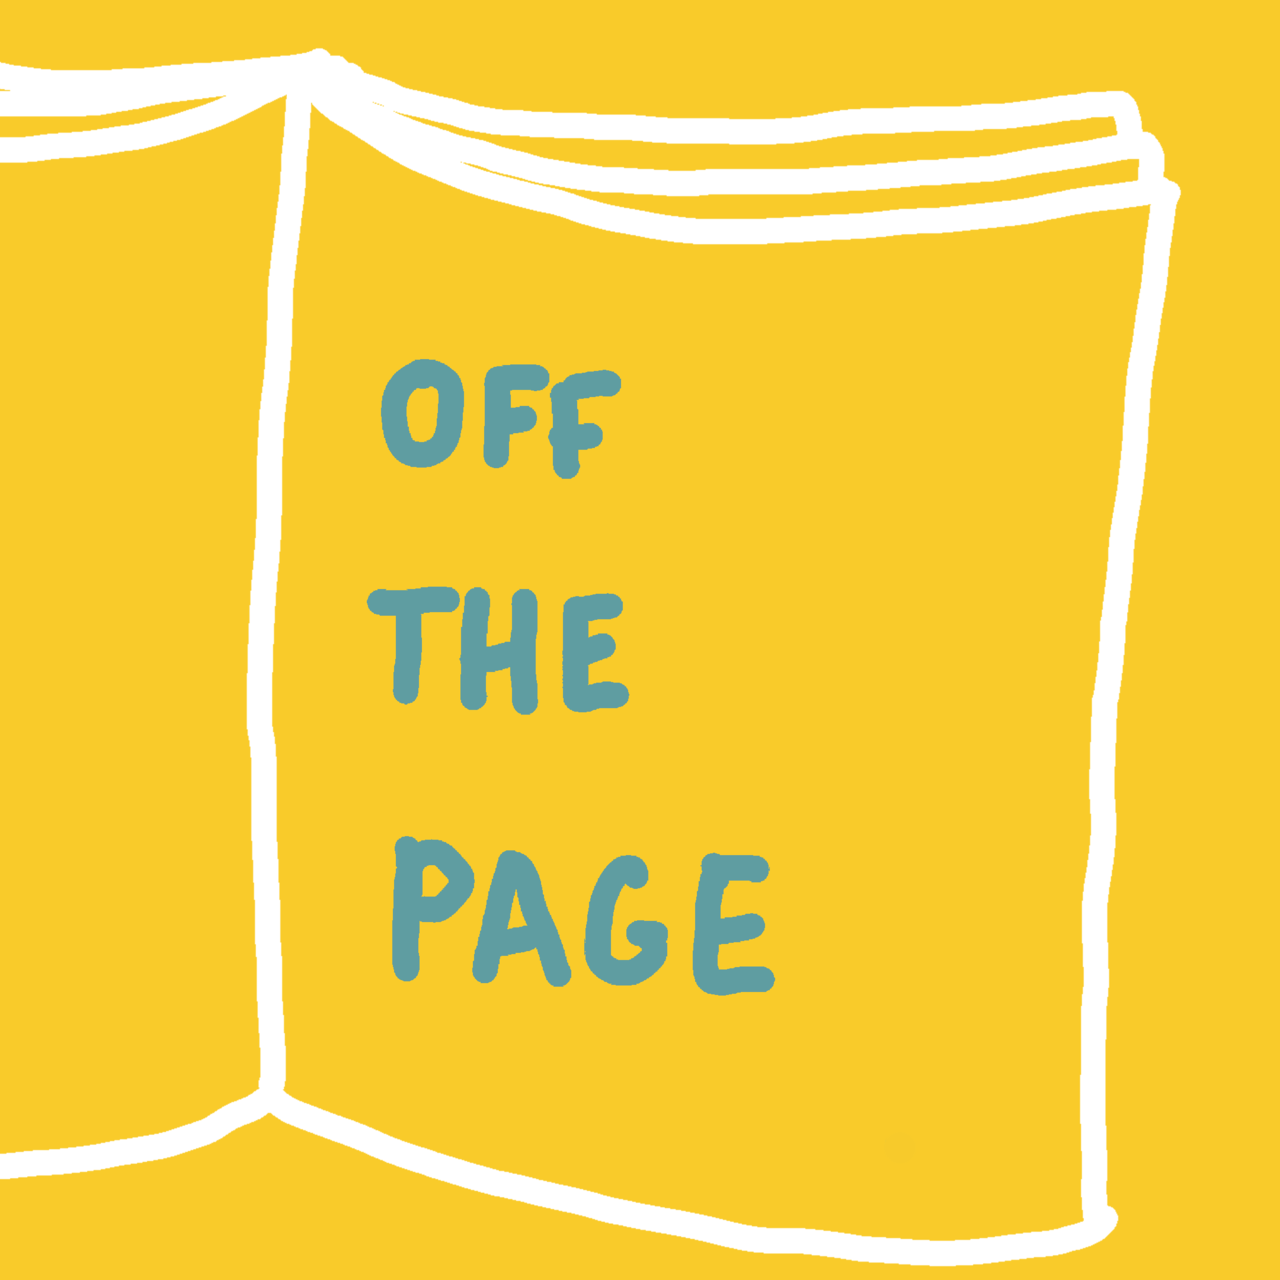 Off the Page by Libby Page